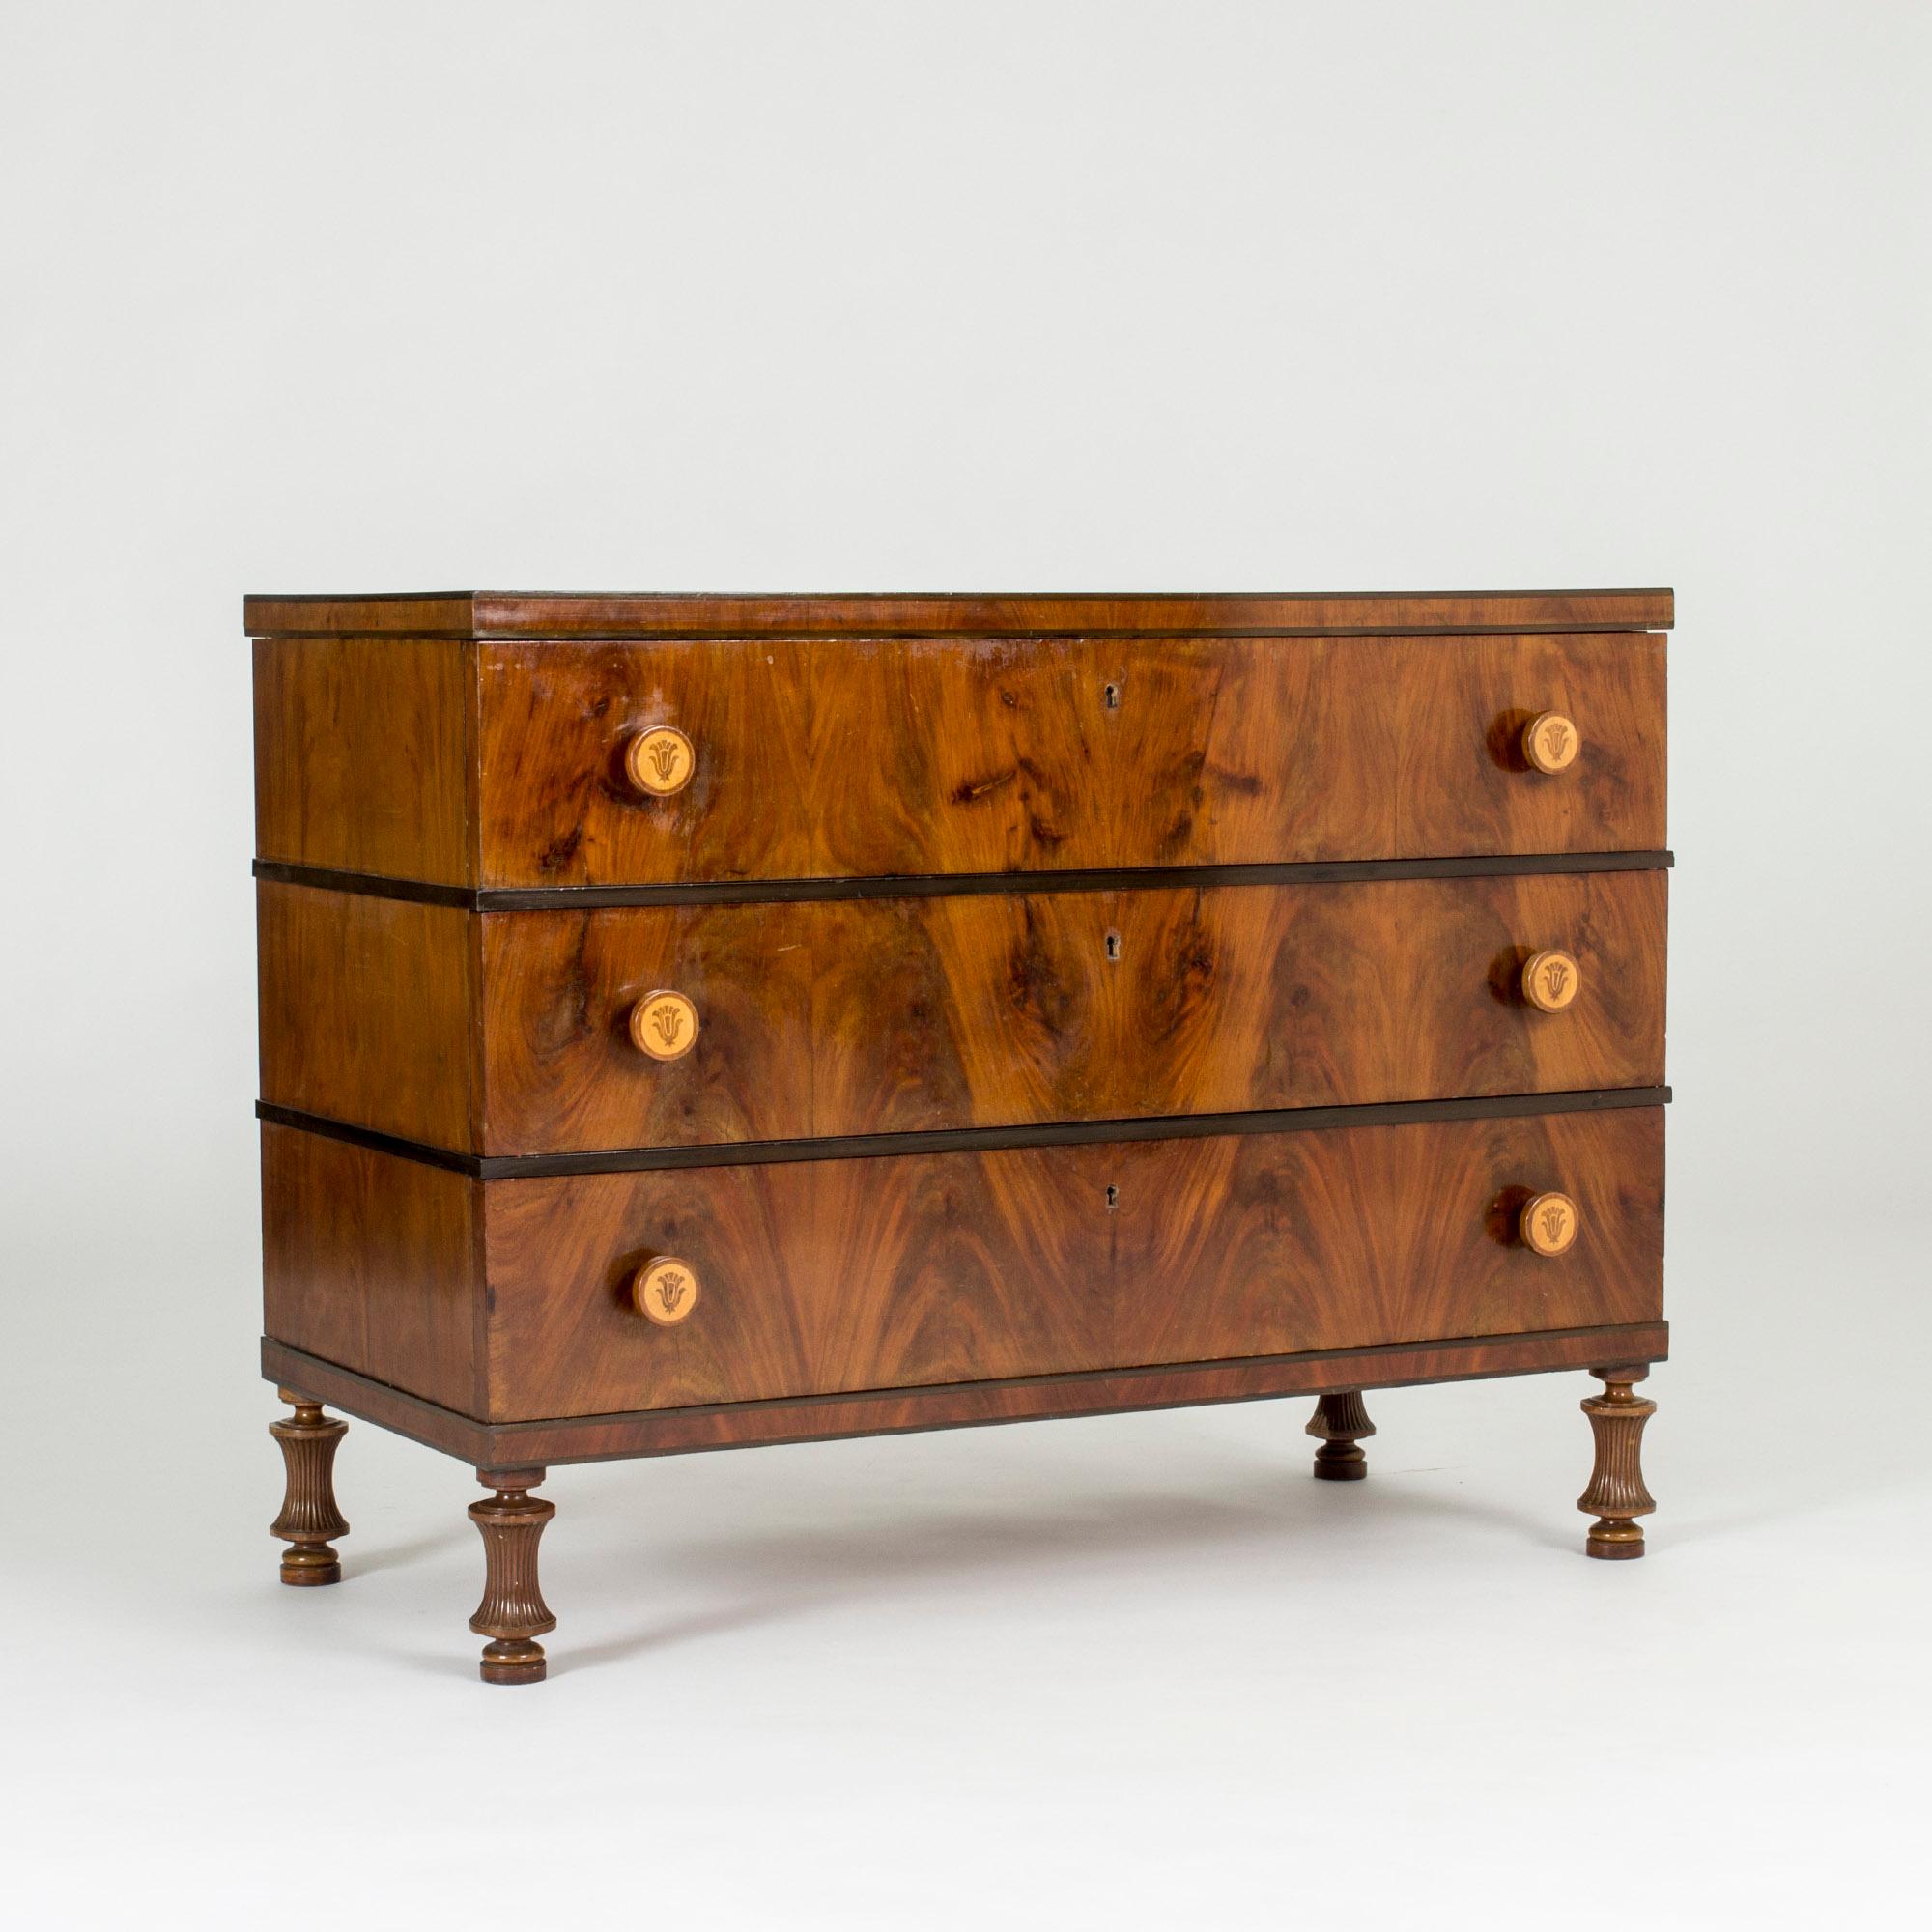 Stunning chest of drawers by Otto Schulz, made with lively mahogany veneer and beautifully sculpted legs. Large, round handles in a contrasting light wood with inlays of a stylized bouquet.

Otto Schulz was a furniture designer, interior designer,